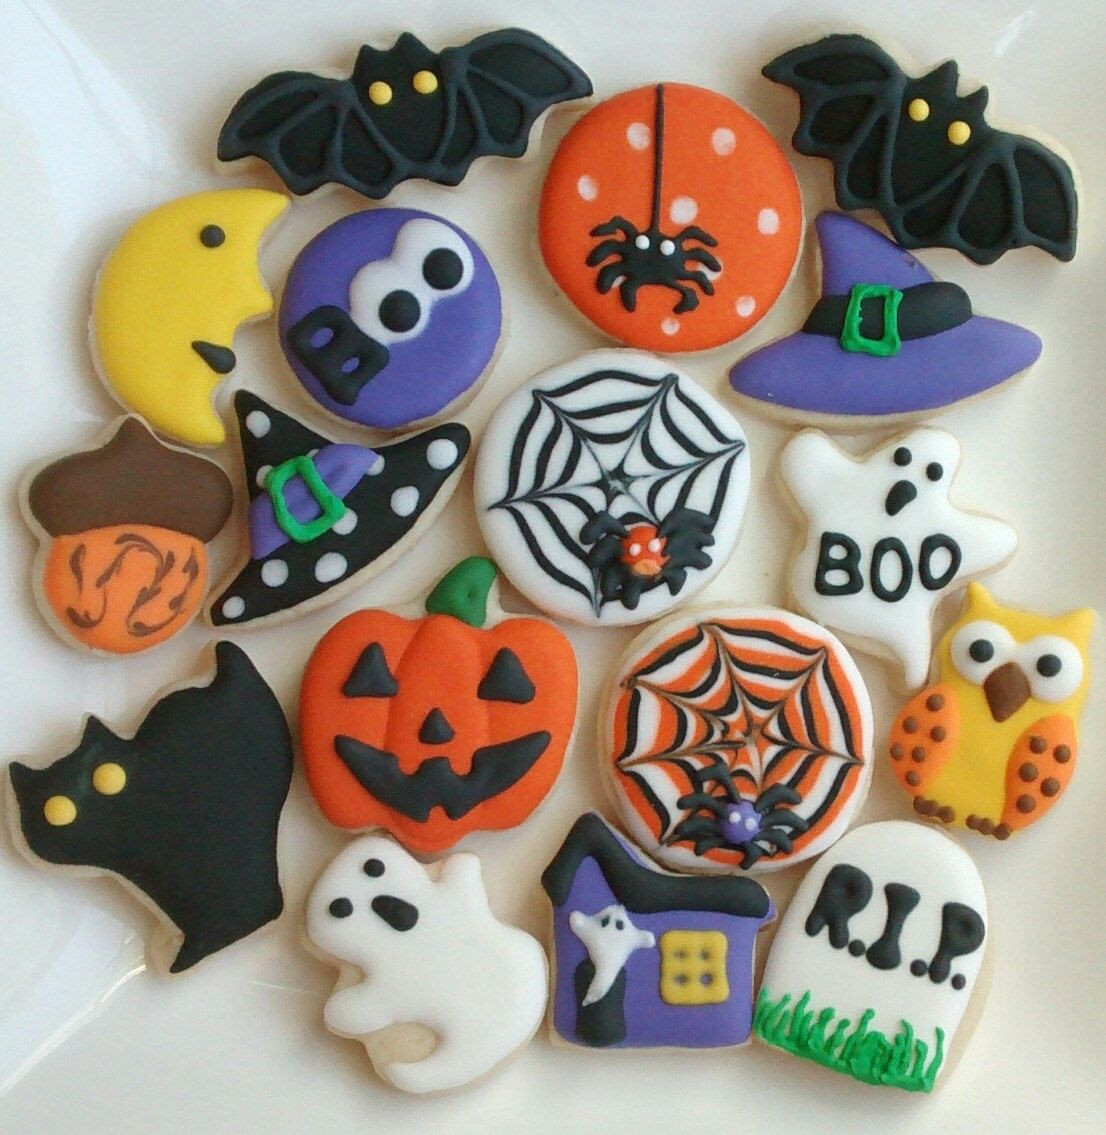 Halloween Cookies Royal Icing
 Halloween sugar cookies mini or large decorated with royal